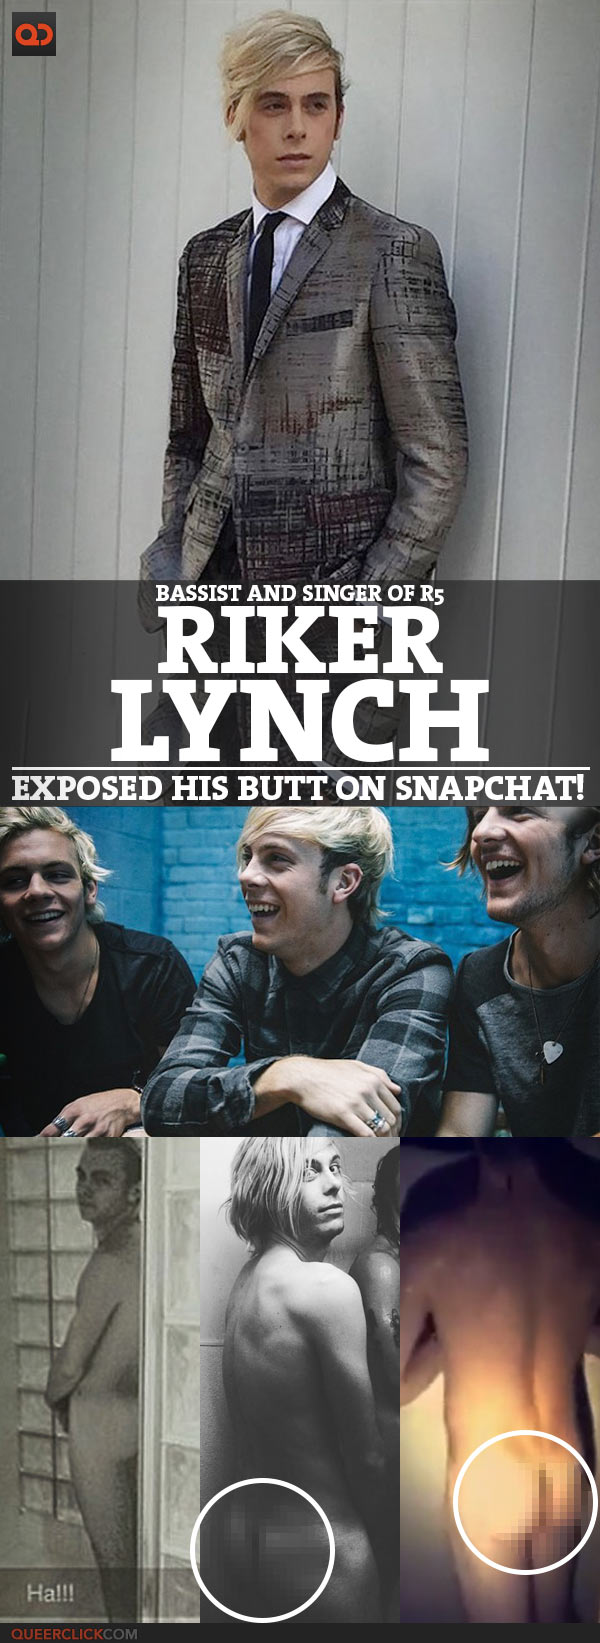 Riker Lynch, Bassist And Singer Of R5, Exposed Butt On Snapchat!